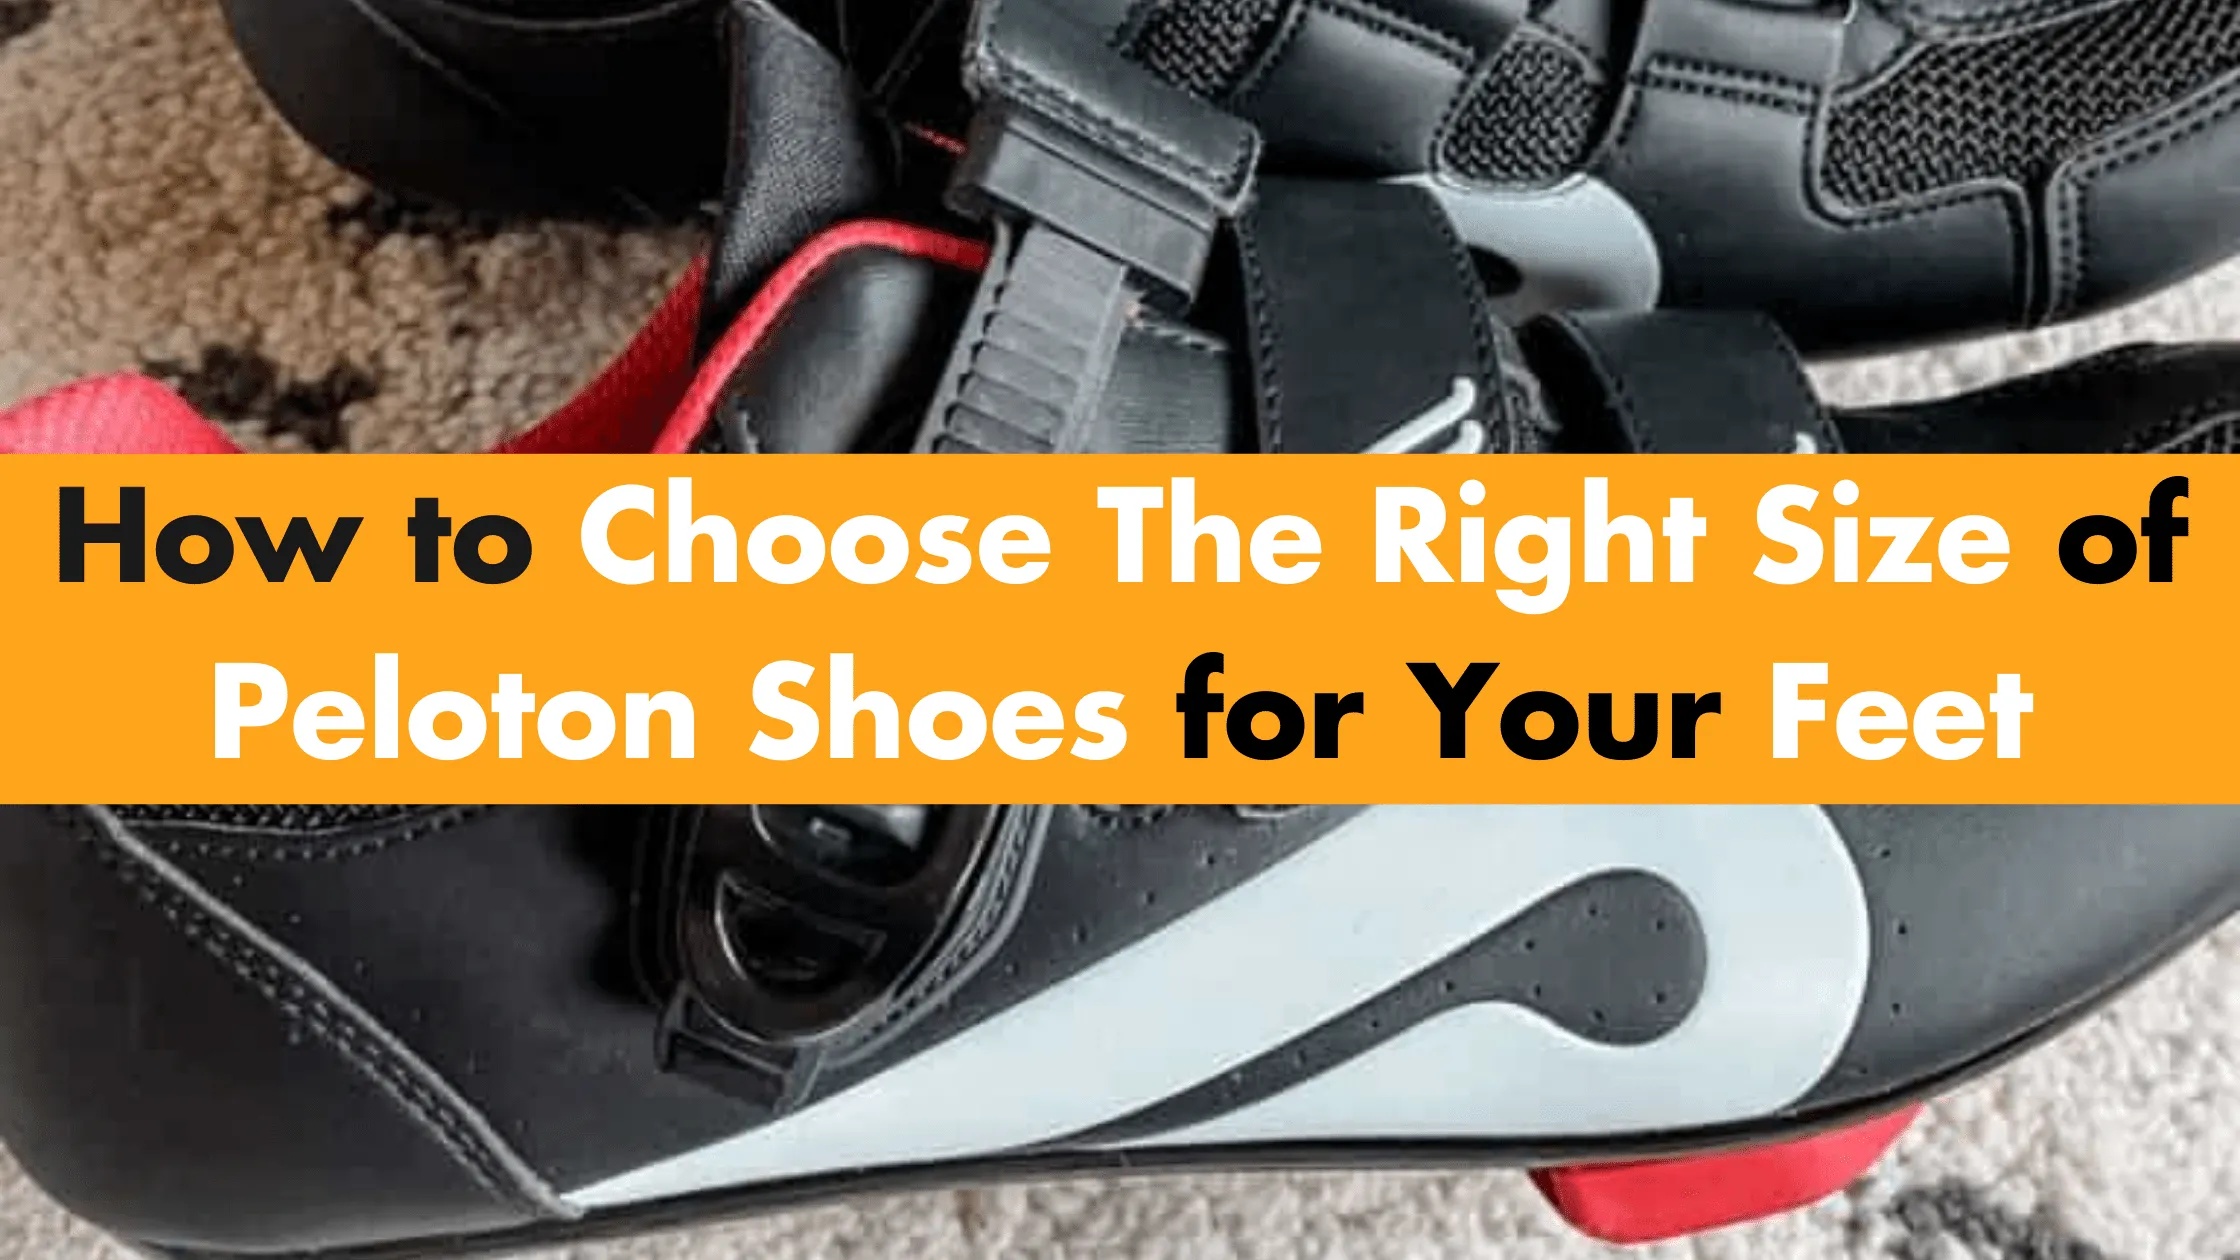 How to Choose the Right Size of Peloton Shoes for Your Feet